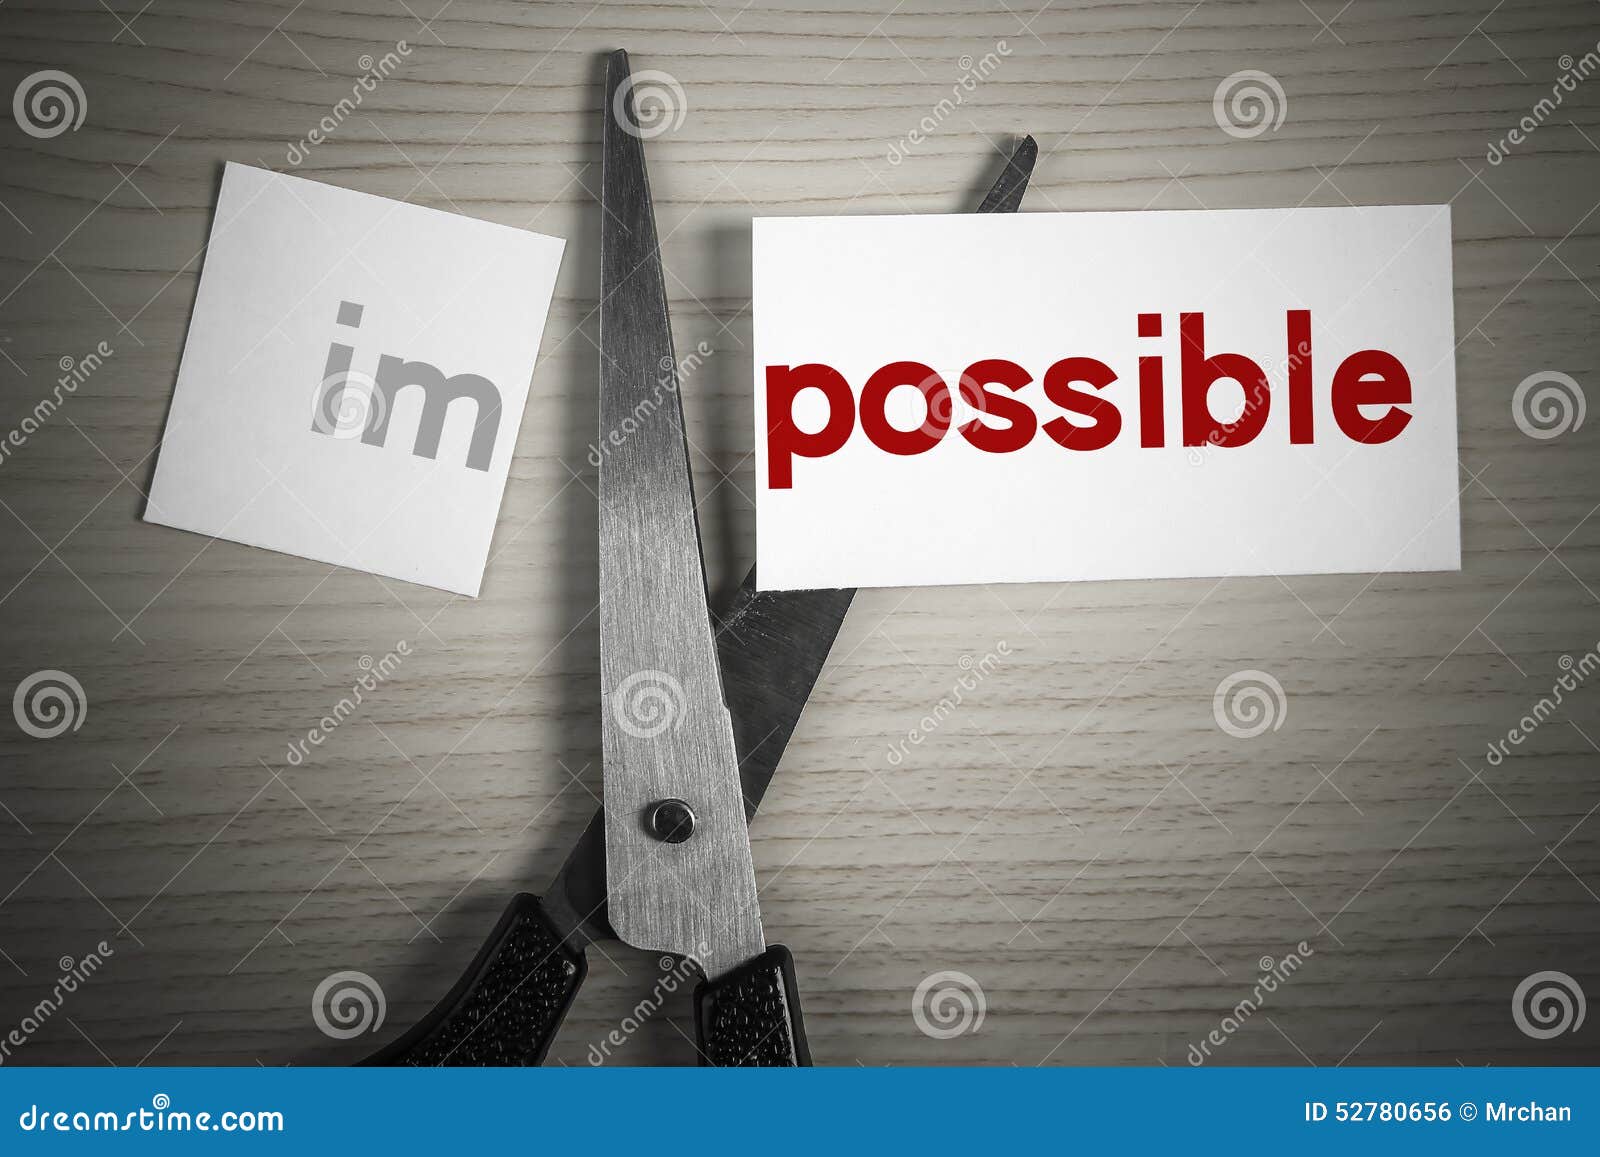 cut possible from impossible